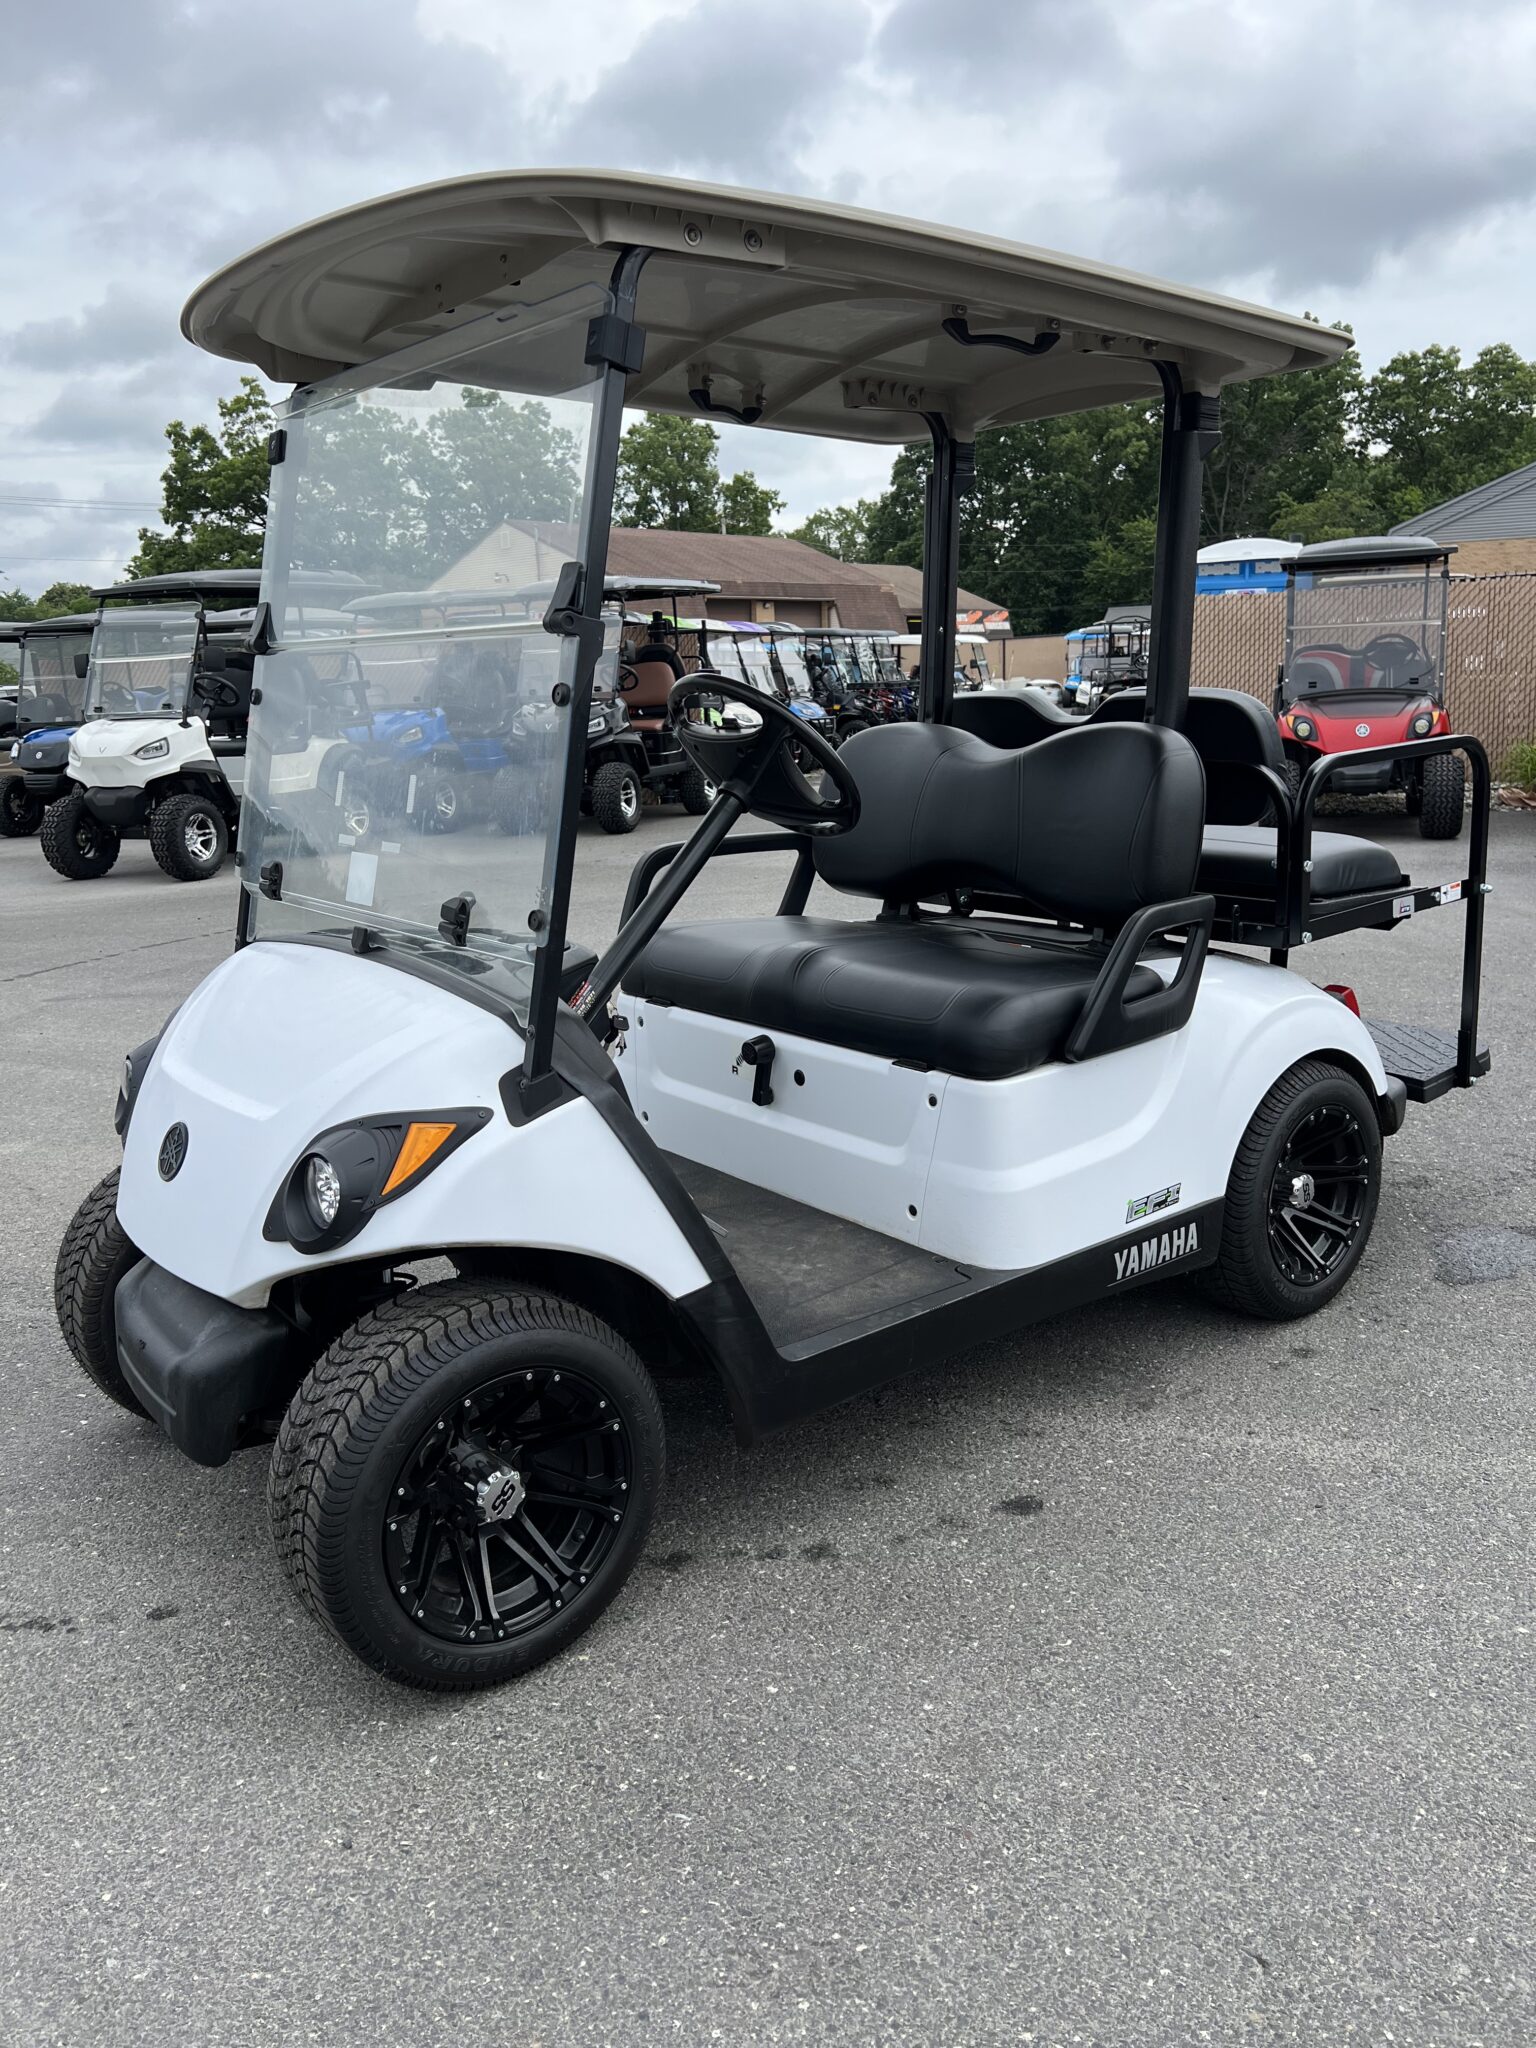 2017 Yamaha Drive2 Gas Powered Efi Quietech Golf Cart Glacier White 4 Seat With Black Mike S